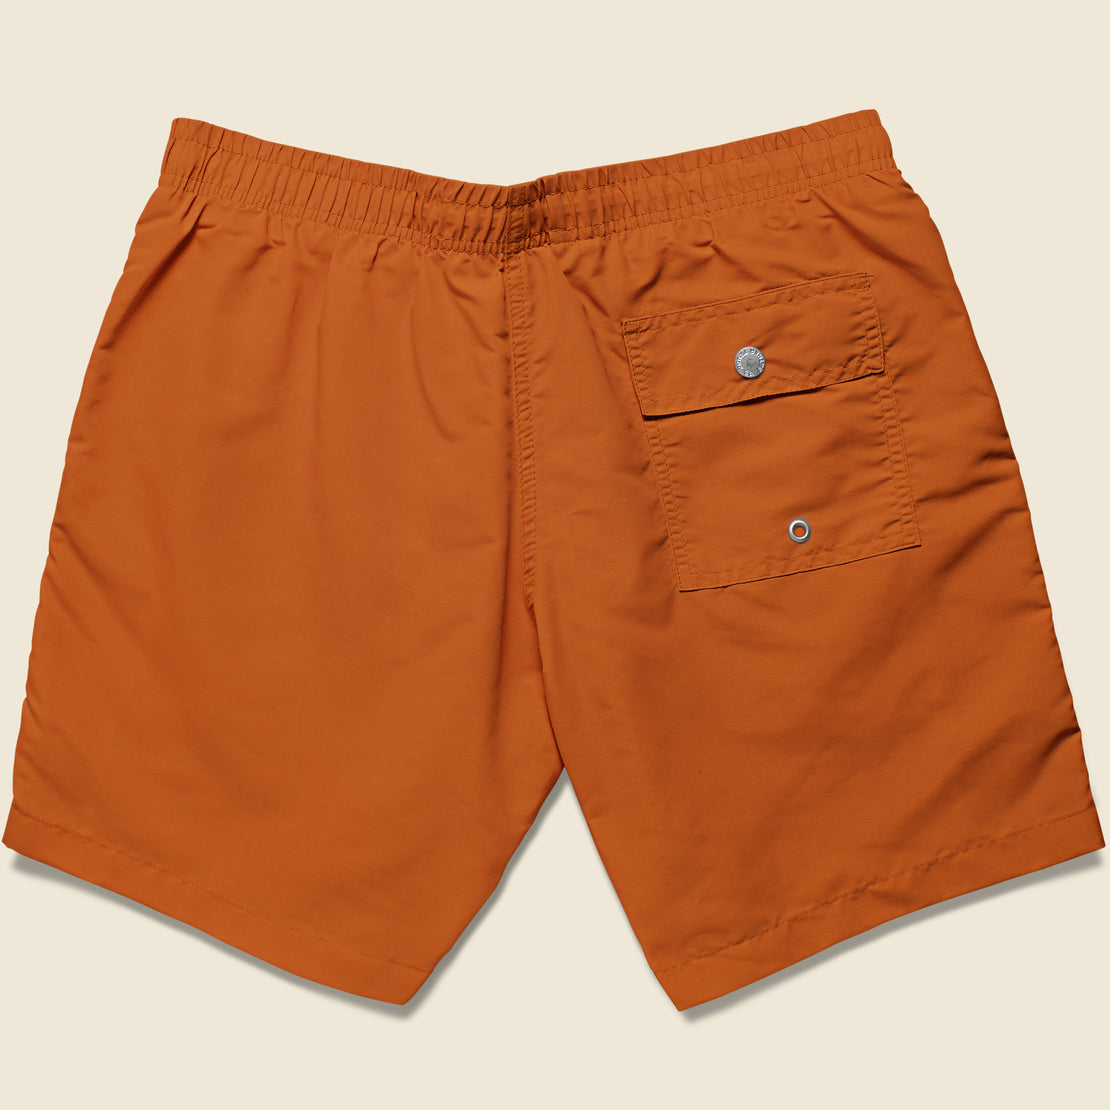 Solid Swim Trunk - Ginger - Bather - STAG Provisions - Shorts - Swim